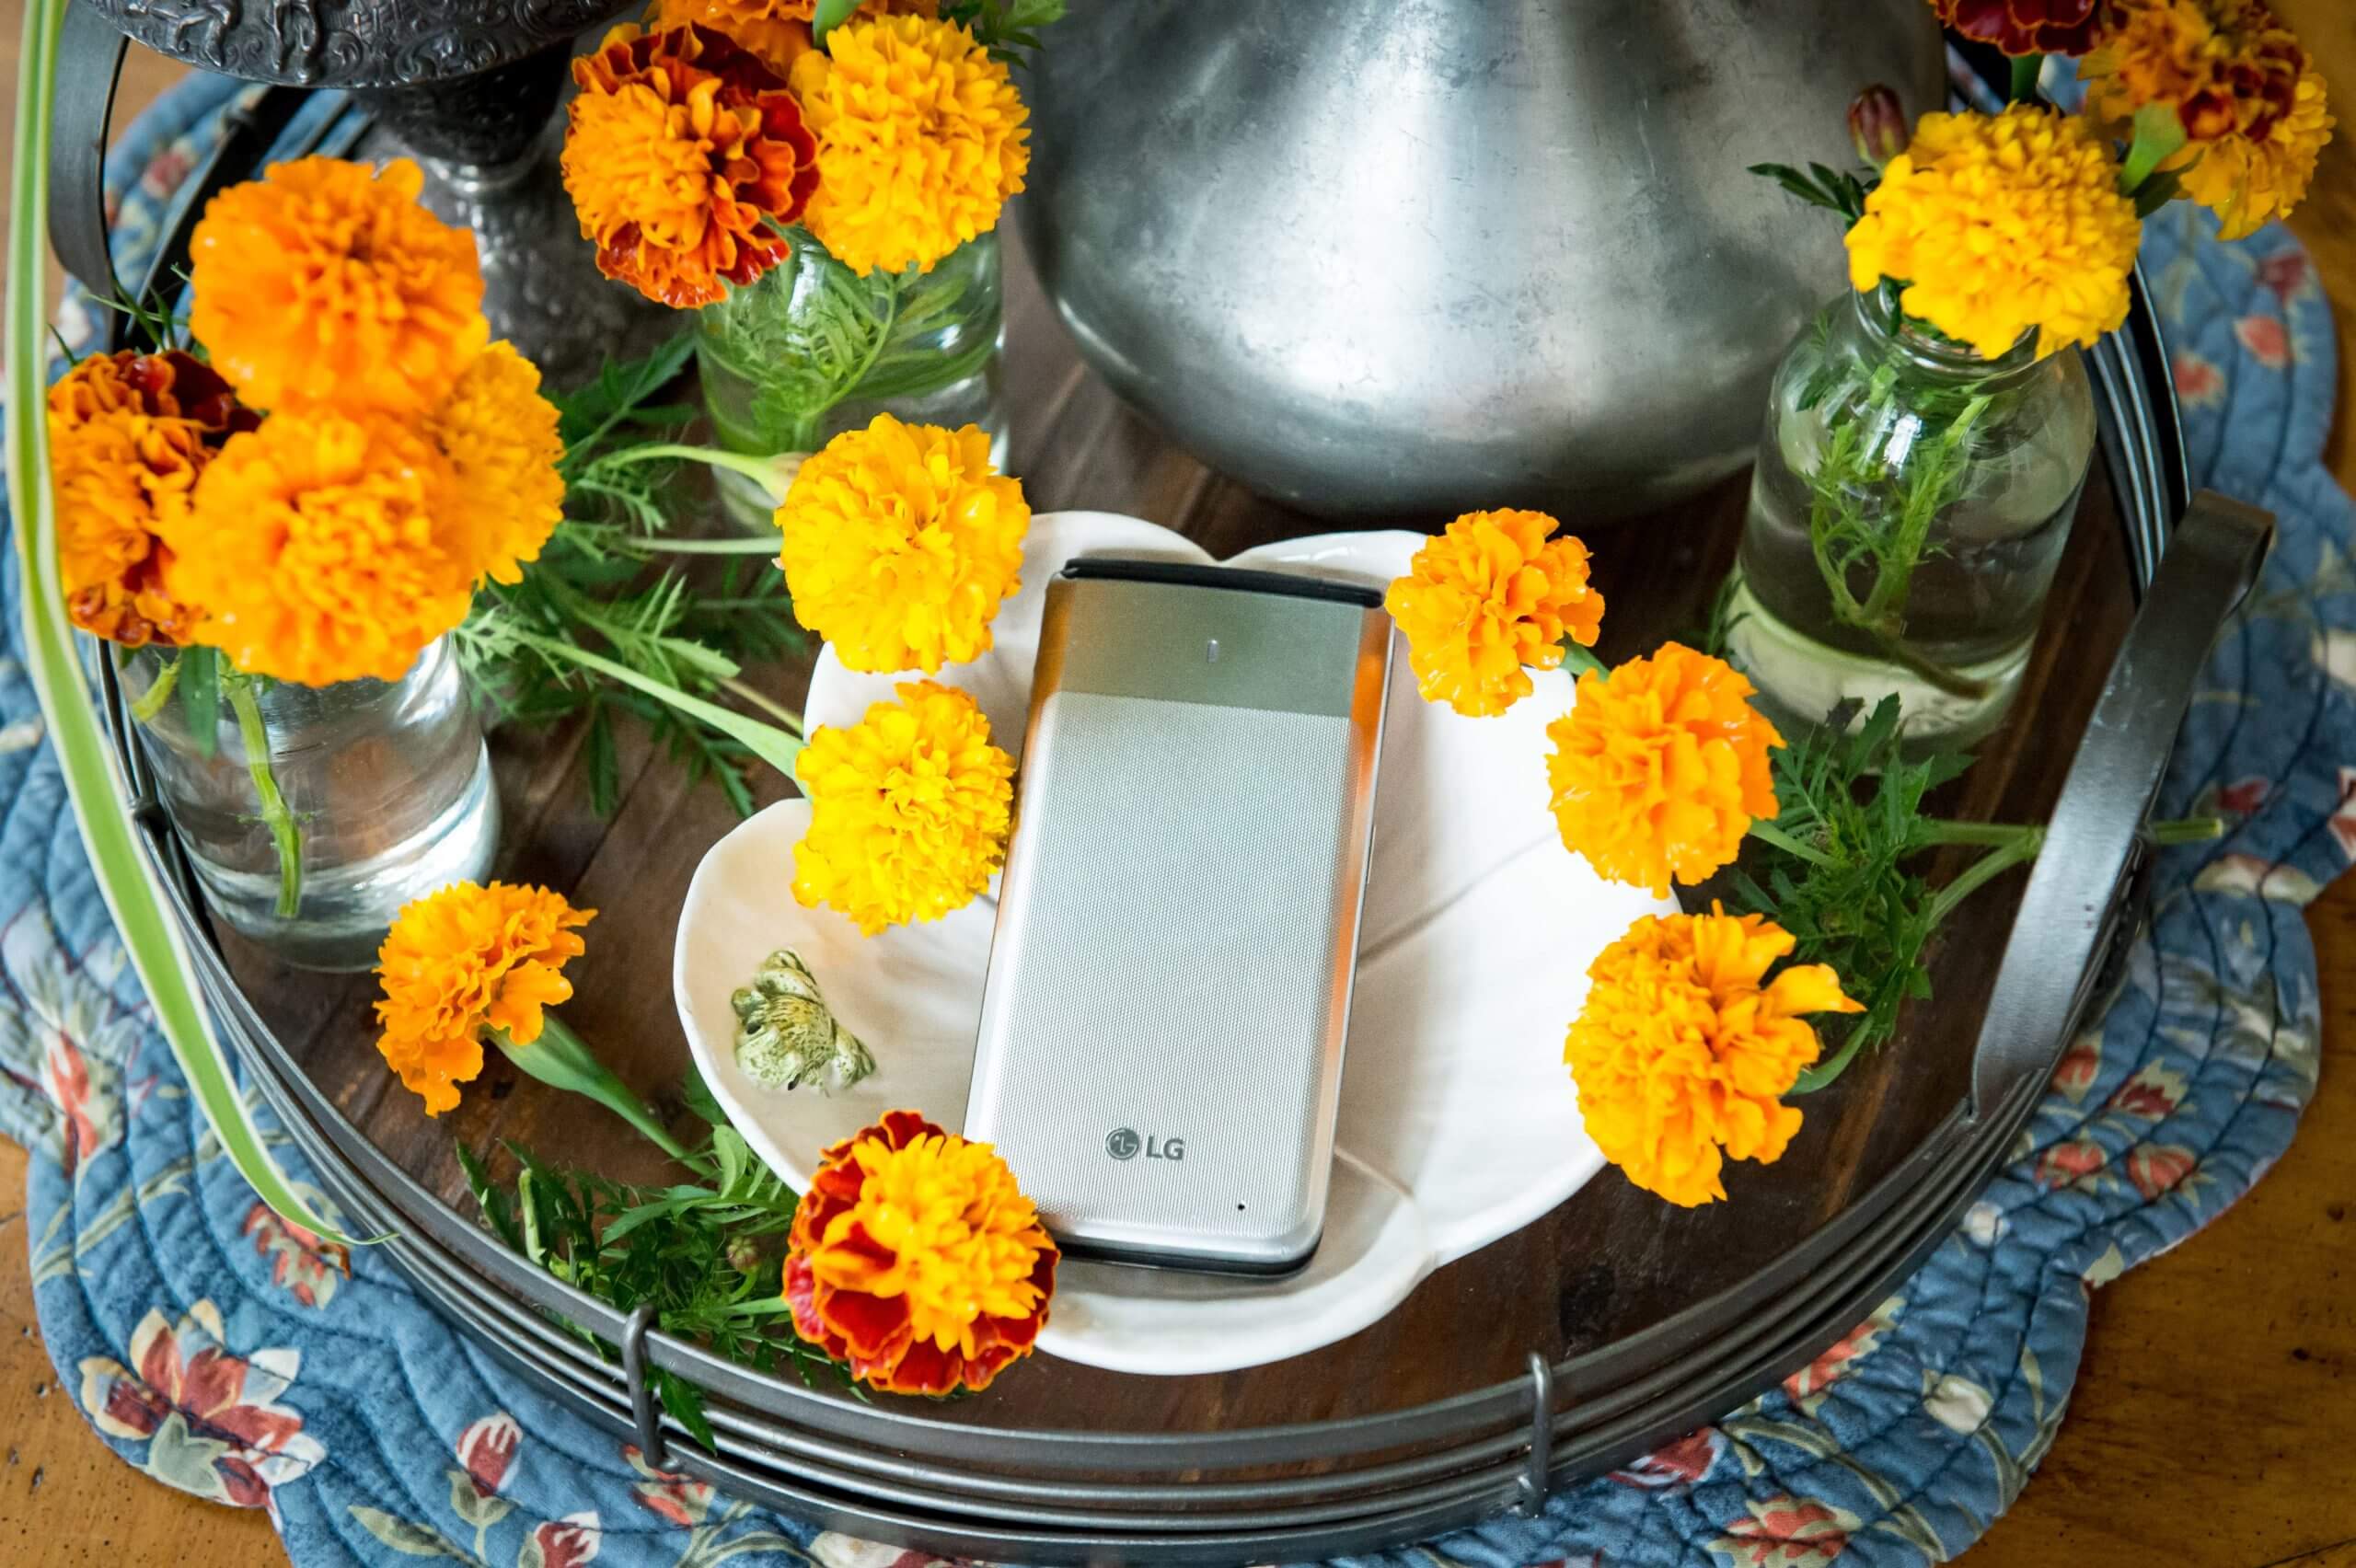 An LG flip phone on a coffee table tray. On the tray are vases of mums and cut mum stems surrounding the phone.